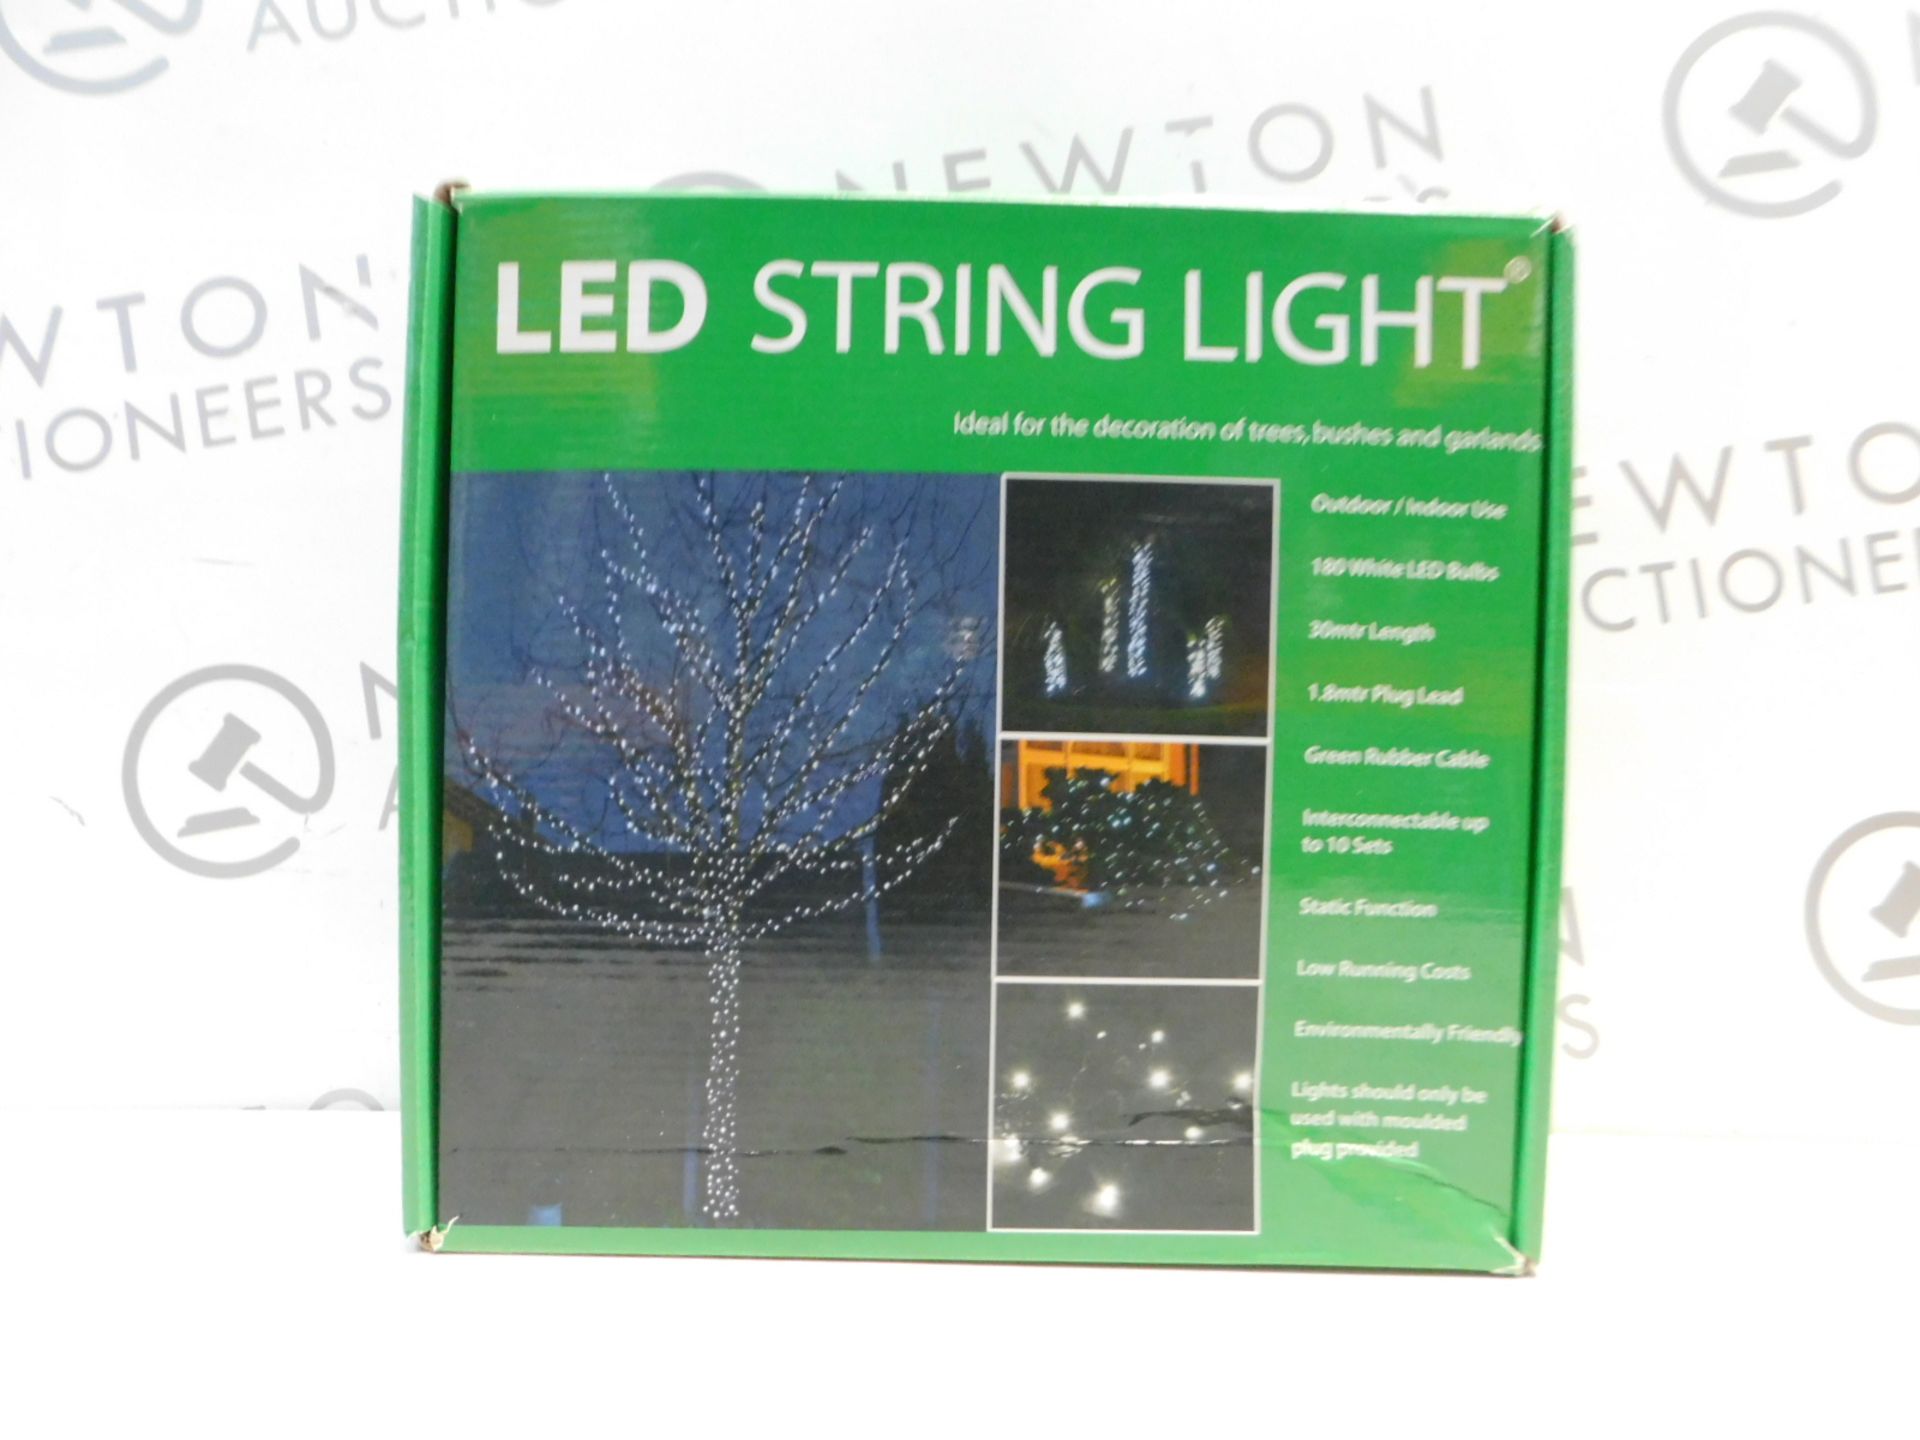 1 BOXED LED STRING LIGHT 30 METERS RRP Â£39.99